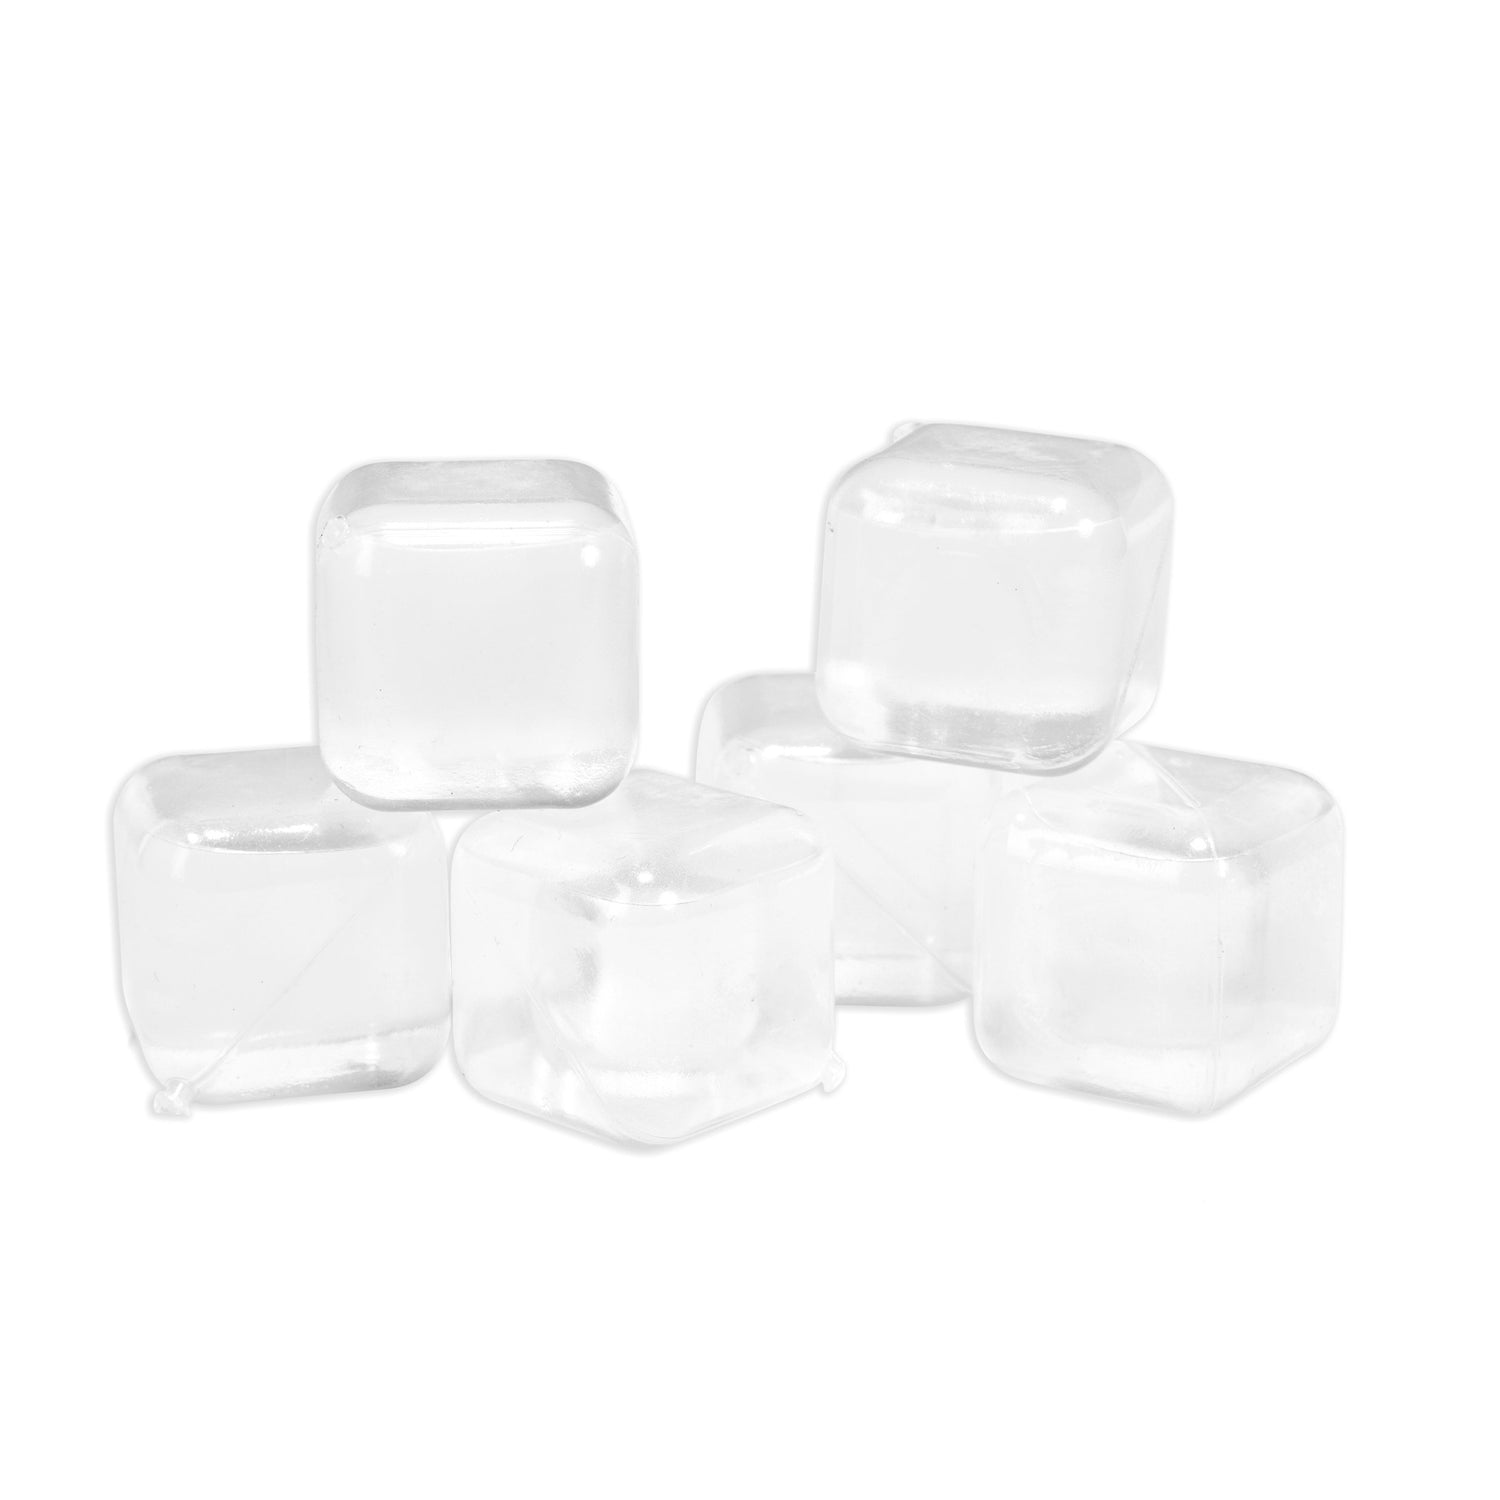 Clear Reusable Ice Cubes S/30